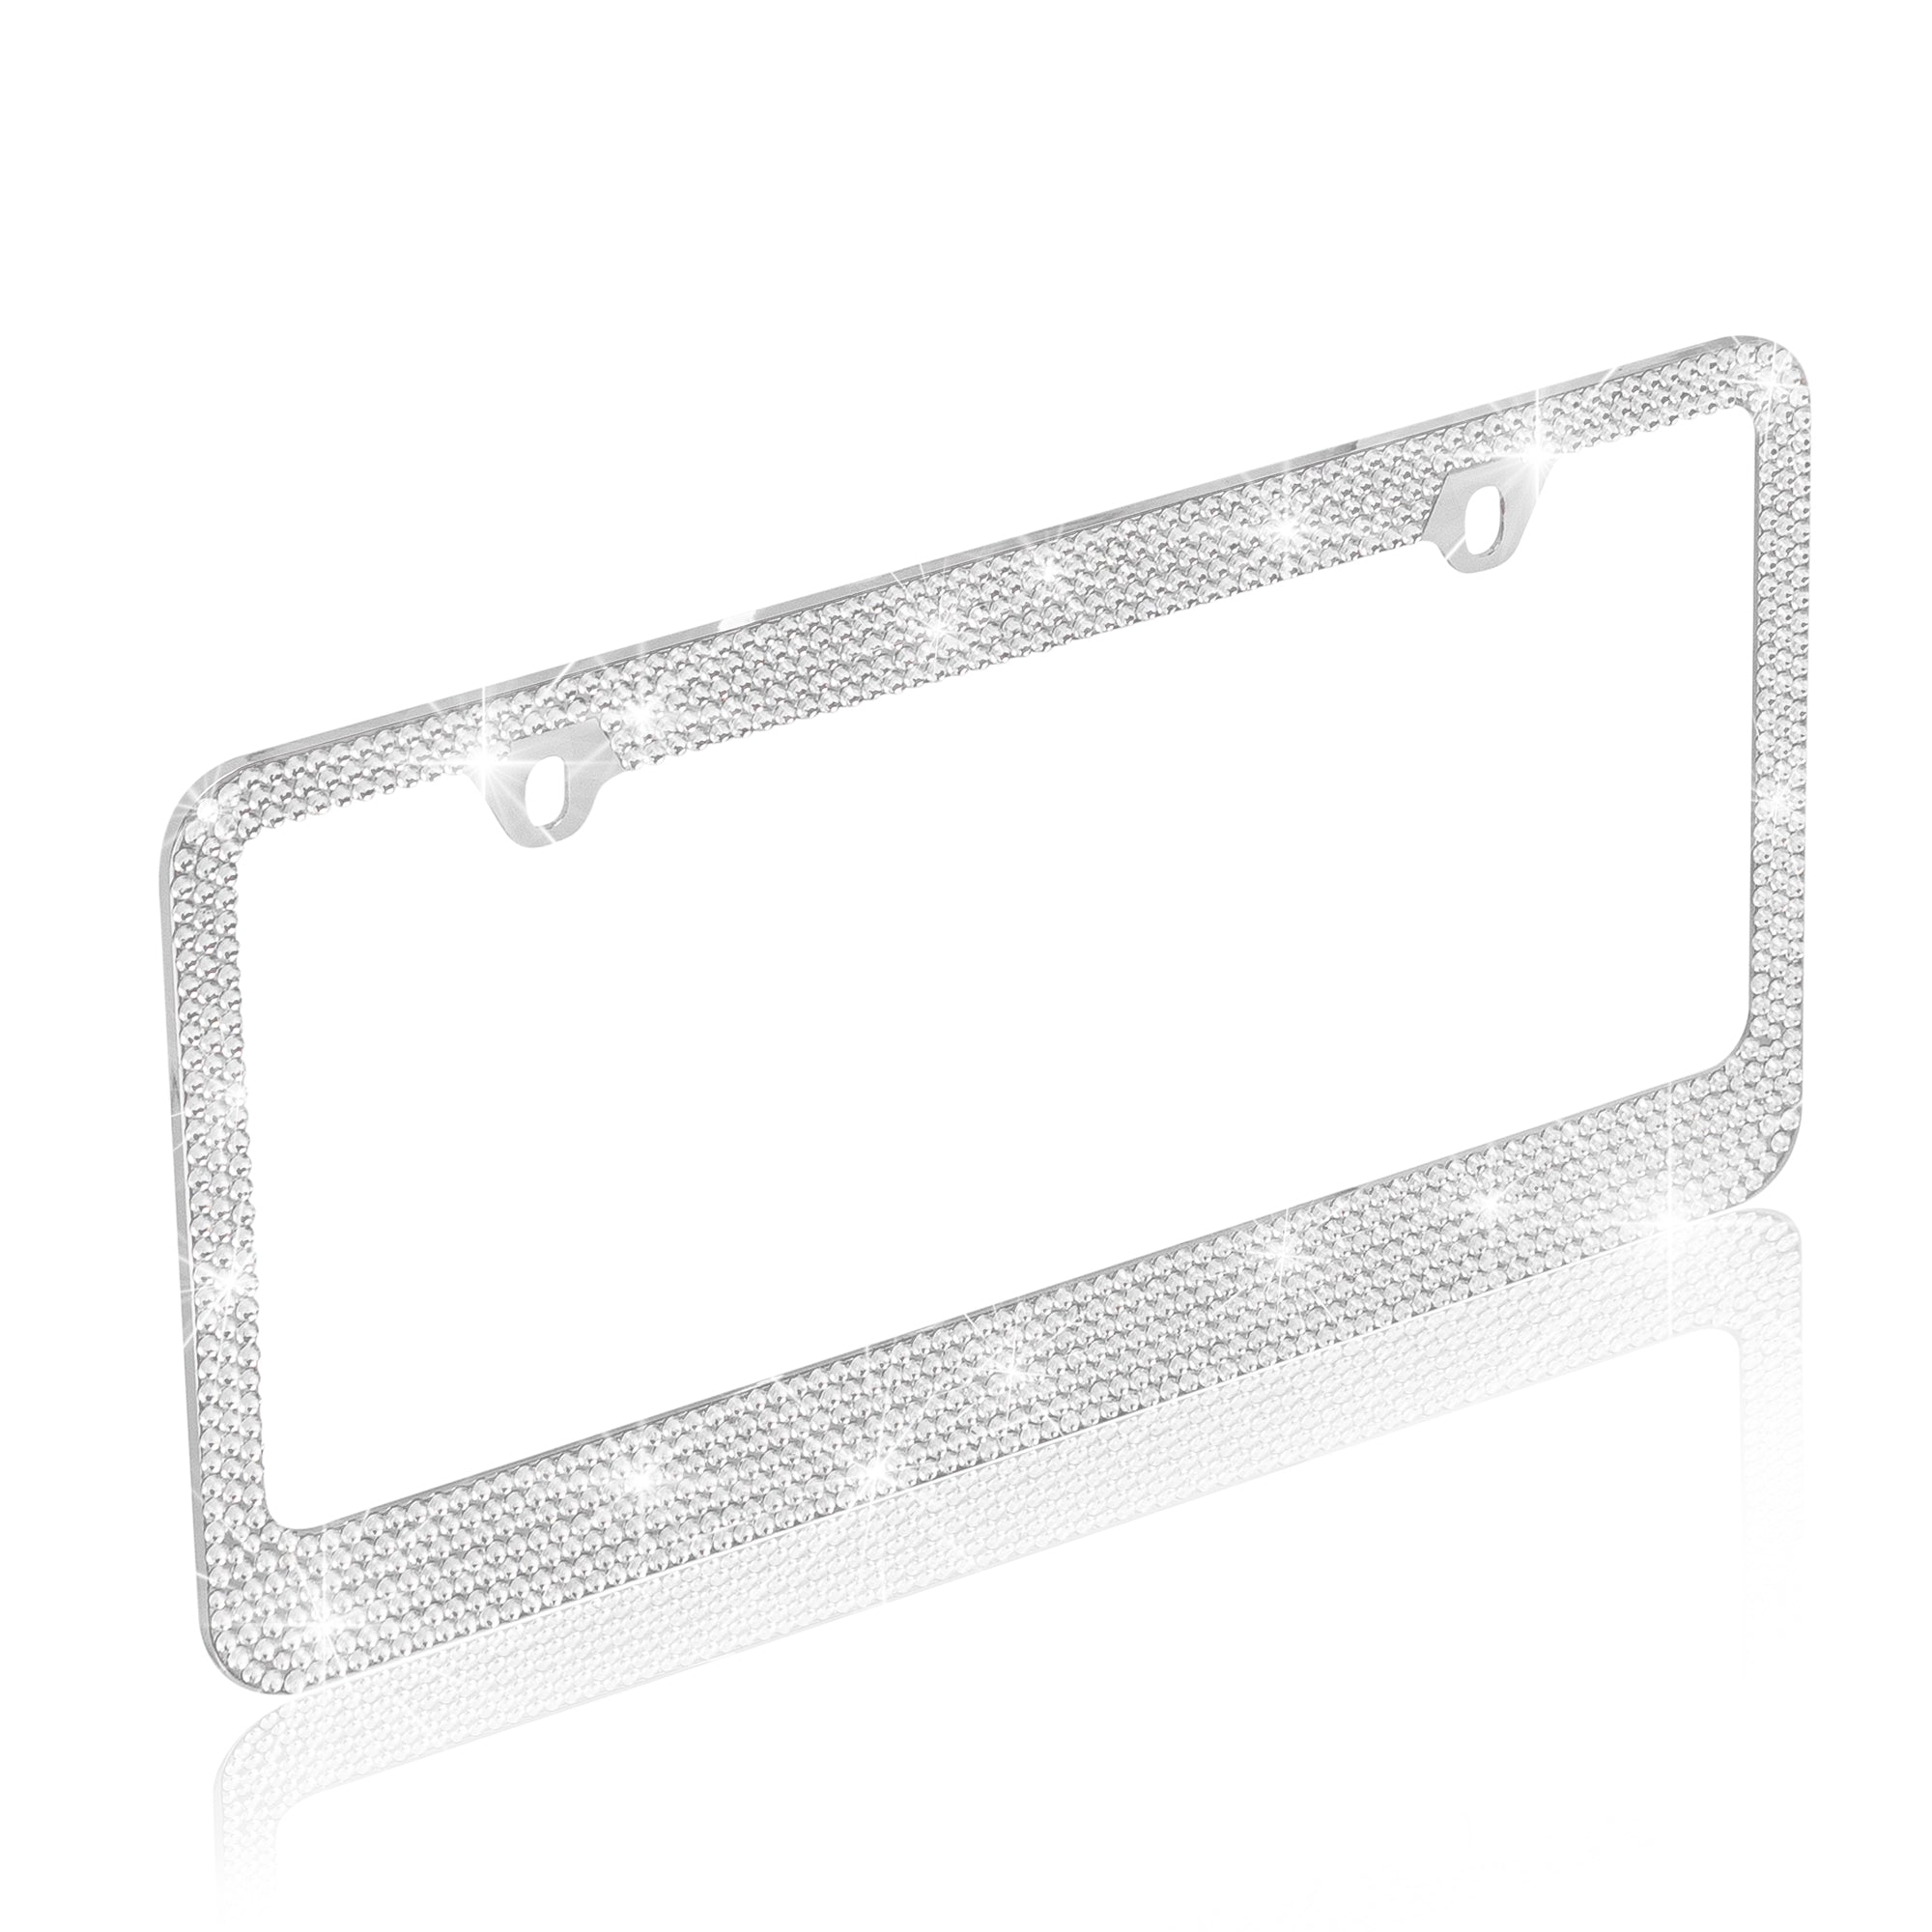 Stainless Steel Silver Sparkly Sparkling Diamond Crystal Bling Premium License Plate Frame Stainless Steel Metal Silver Rhinestone for Women Universal Size for Car Truck SUV (Pack of 2) - 2-Pack